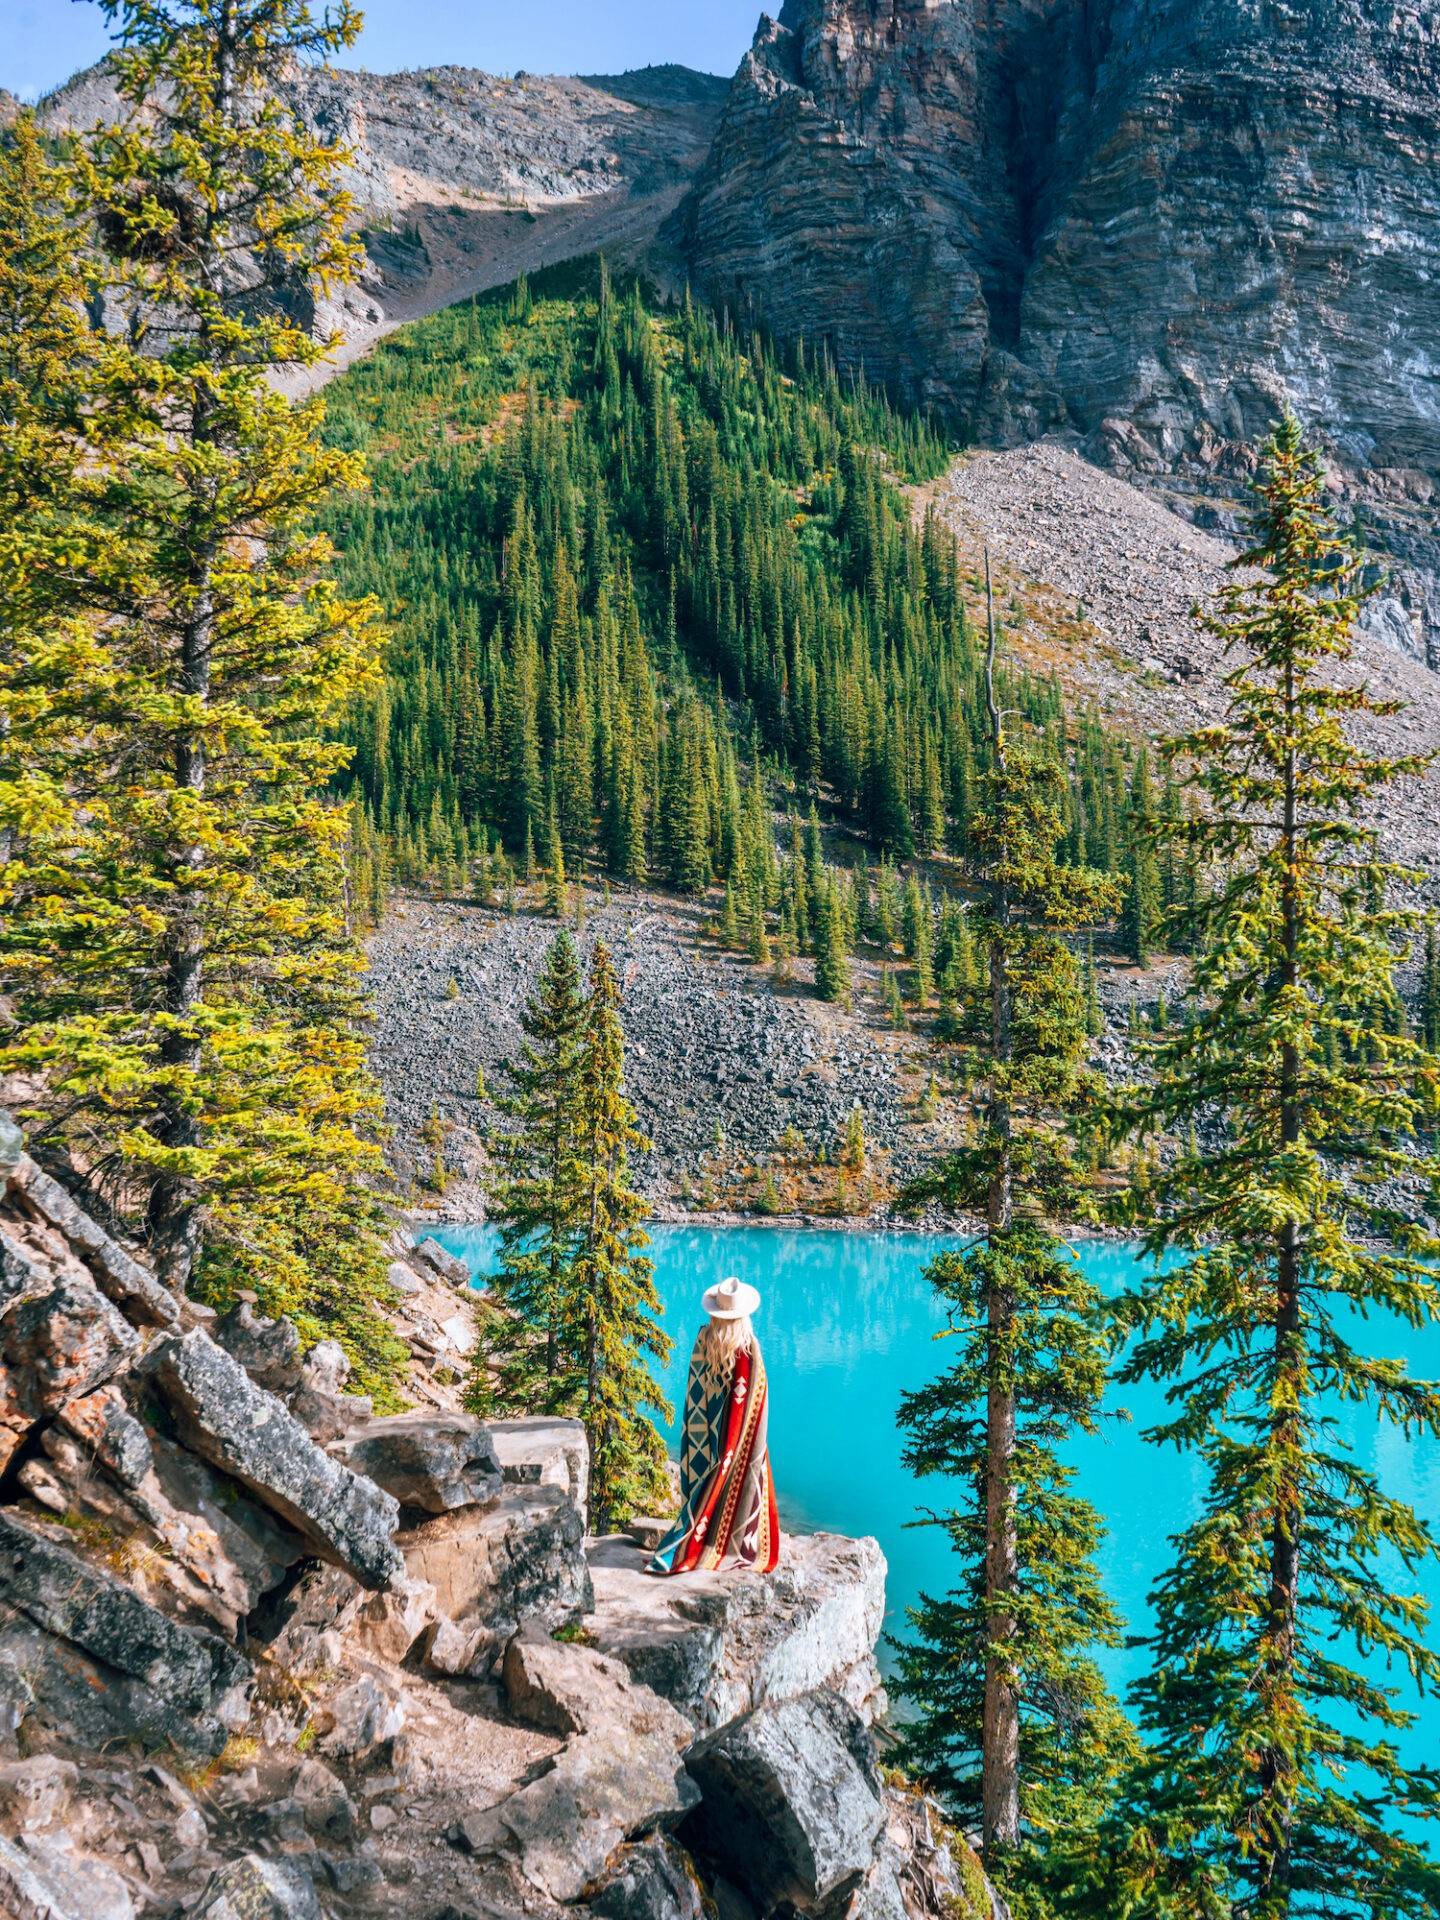 Visiting Banff National Park soon? Don't miss this guide of the 50 best things to in Banff for every kind of traveler! I recently spent 8 days exploring the area and took notes along the way so I could write you the most comprehensive guide possible. This guide includes all the top attractions, hikes, restaurants, and sights you definitely won't want to miss when you visit Banff National Park. I also include any tips you might need when visiting the area! Pictured here: Moraine Lake Rockpile Trail